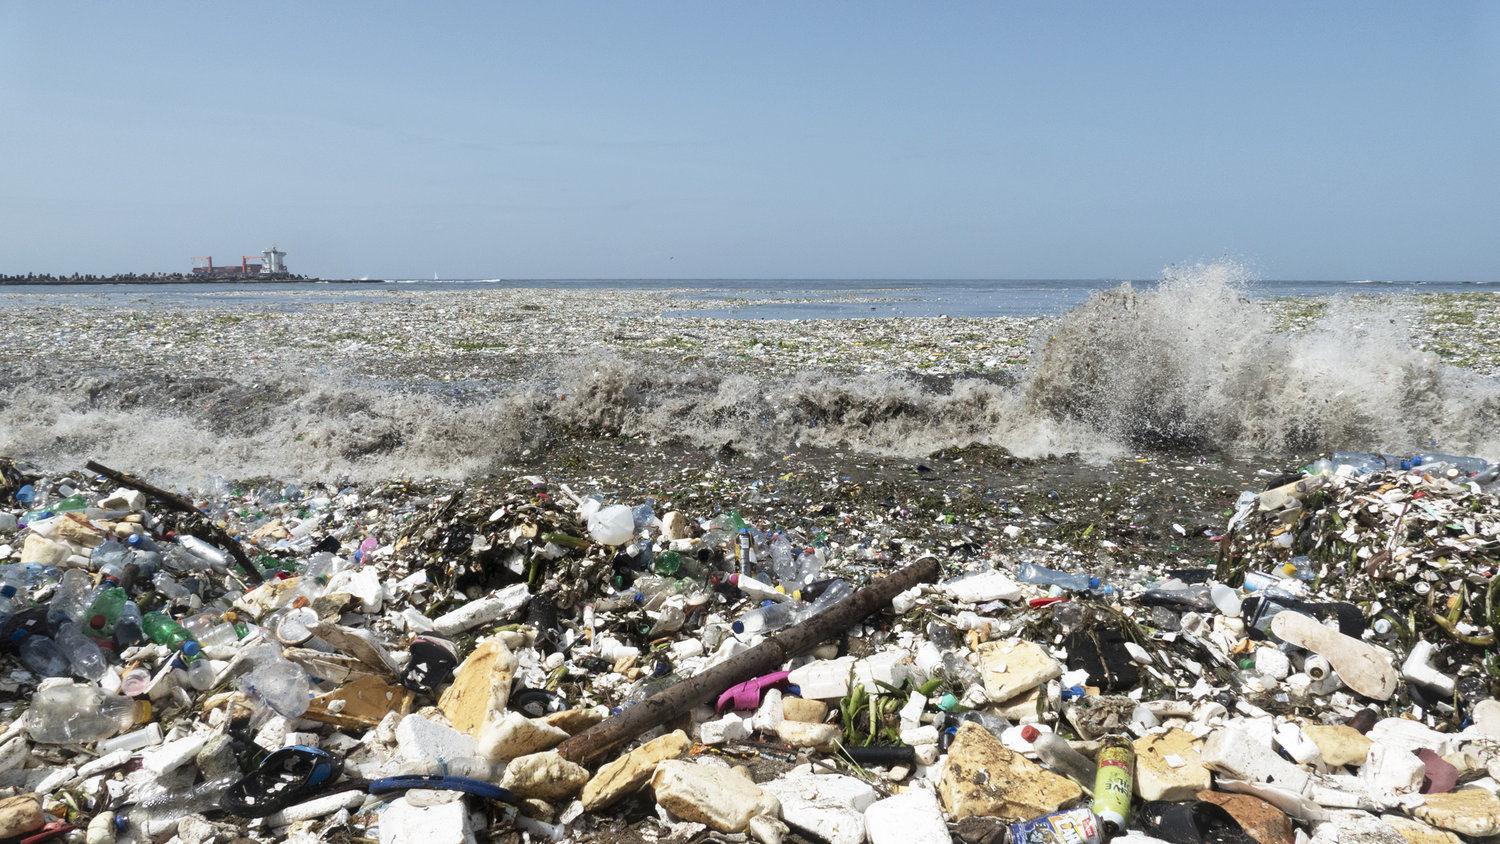 Waves of garbage are washing onto a beach in the Dominican Republic